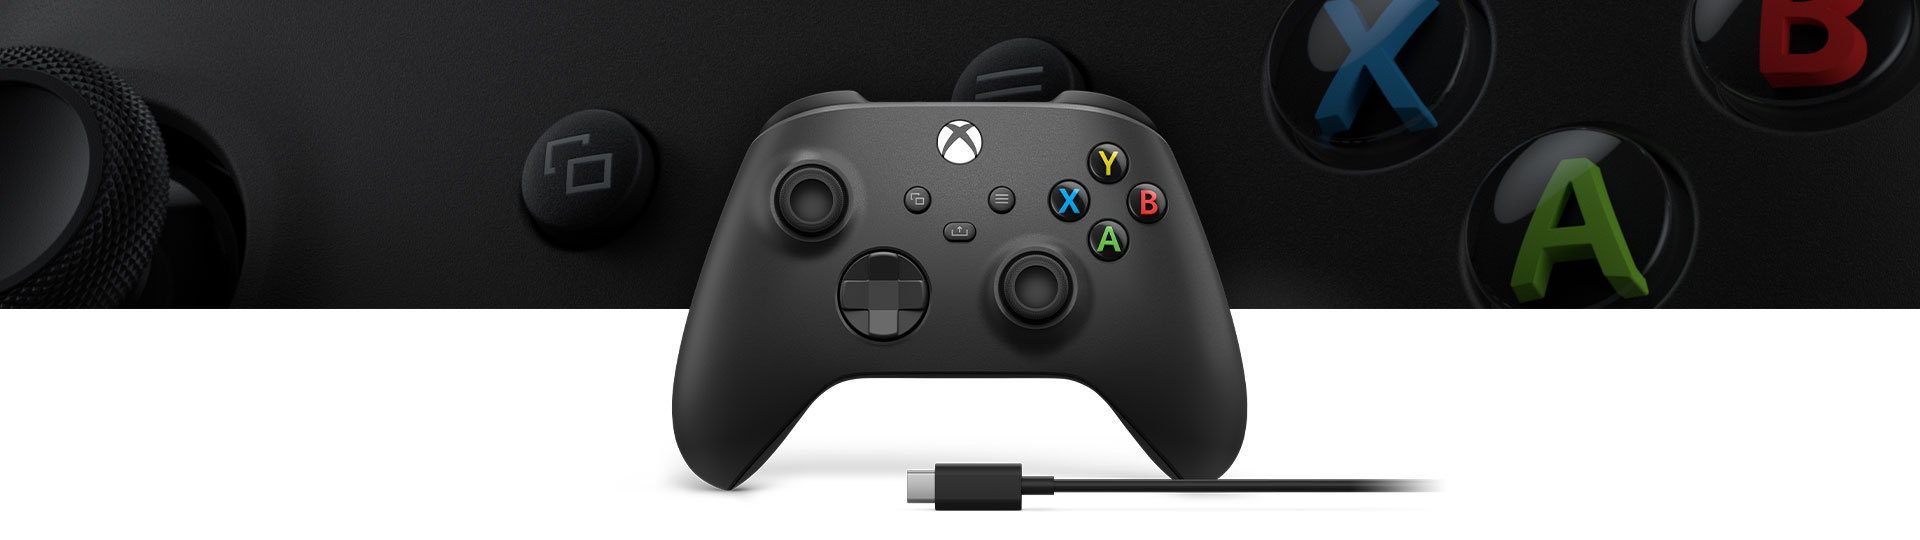 Xbox Wireless Controller + USB-C® Cable with a close-up of controller surface texture